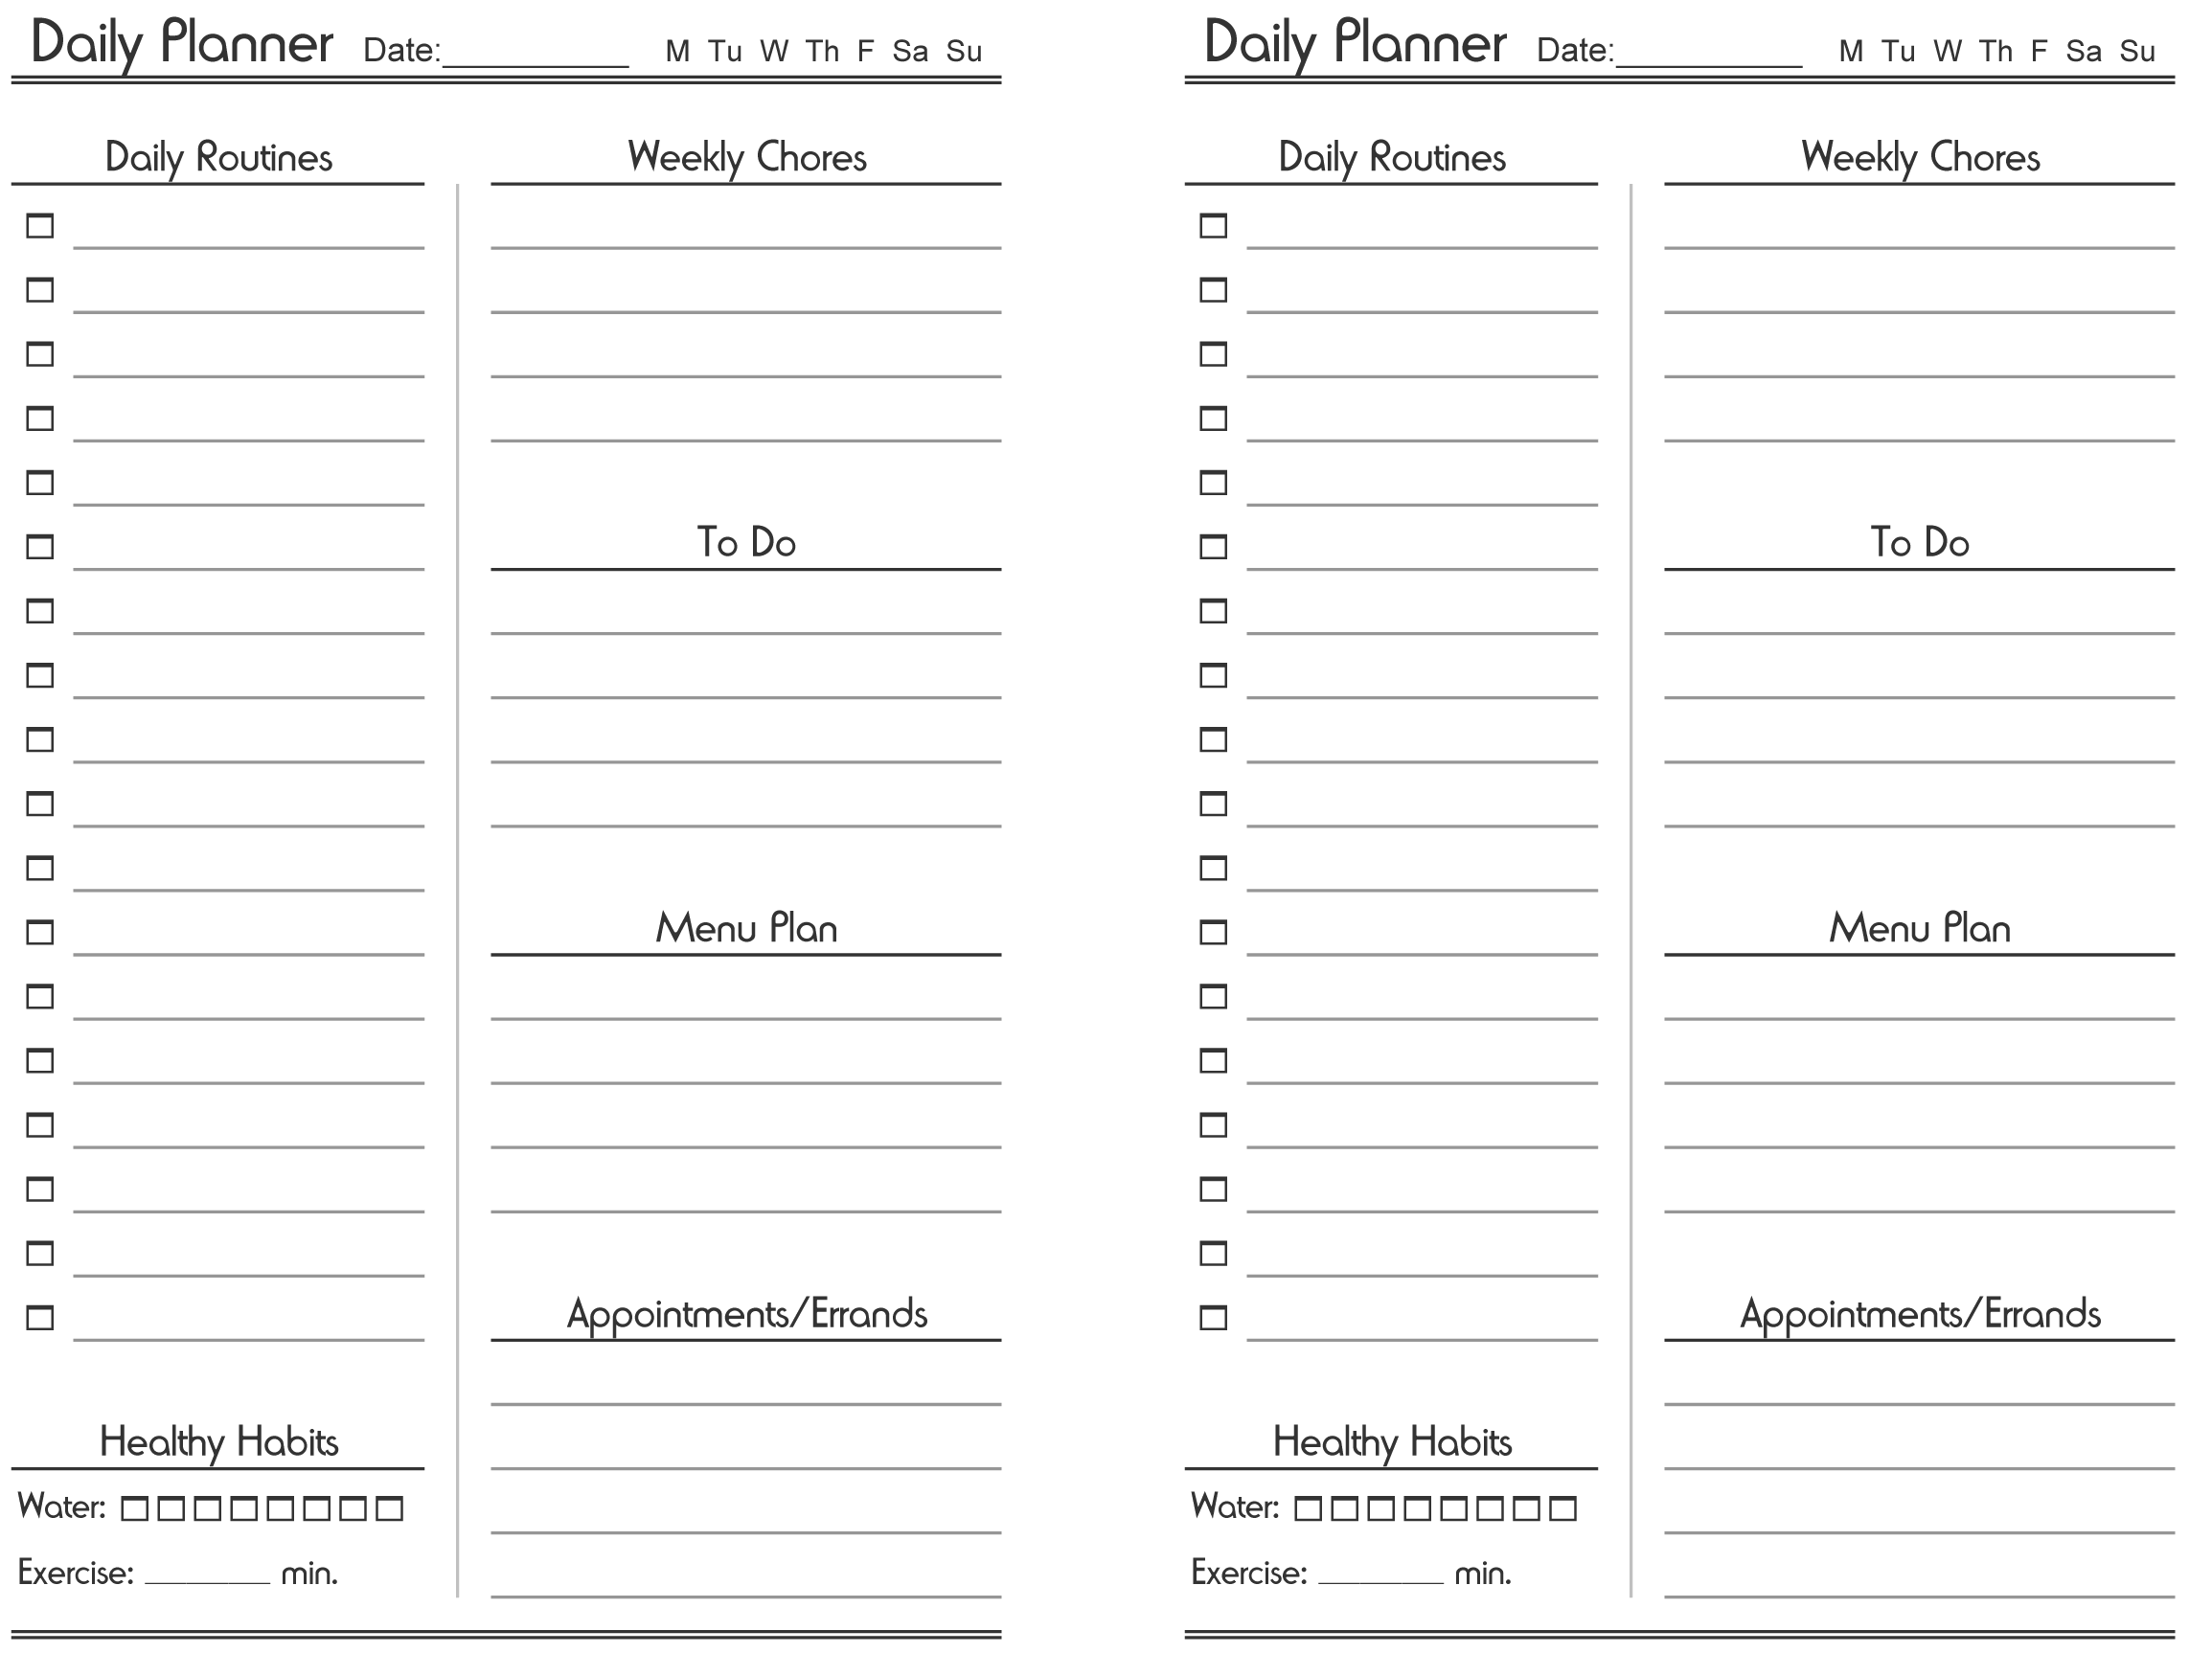 Daily Planner Template That Helps to Keep You on Track